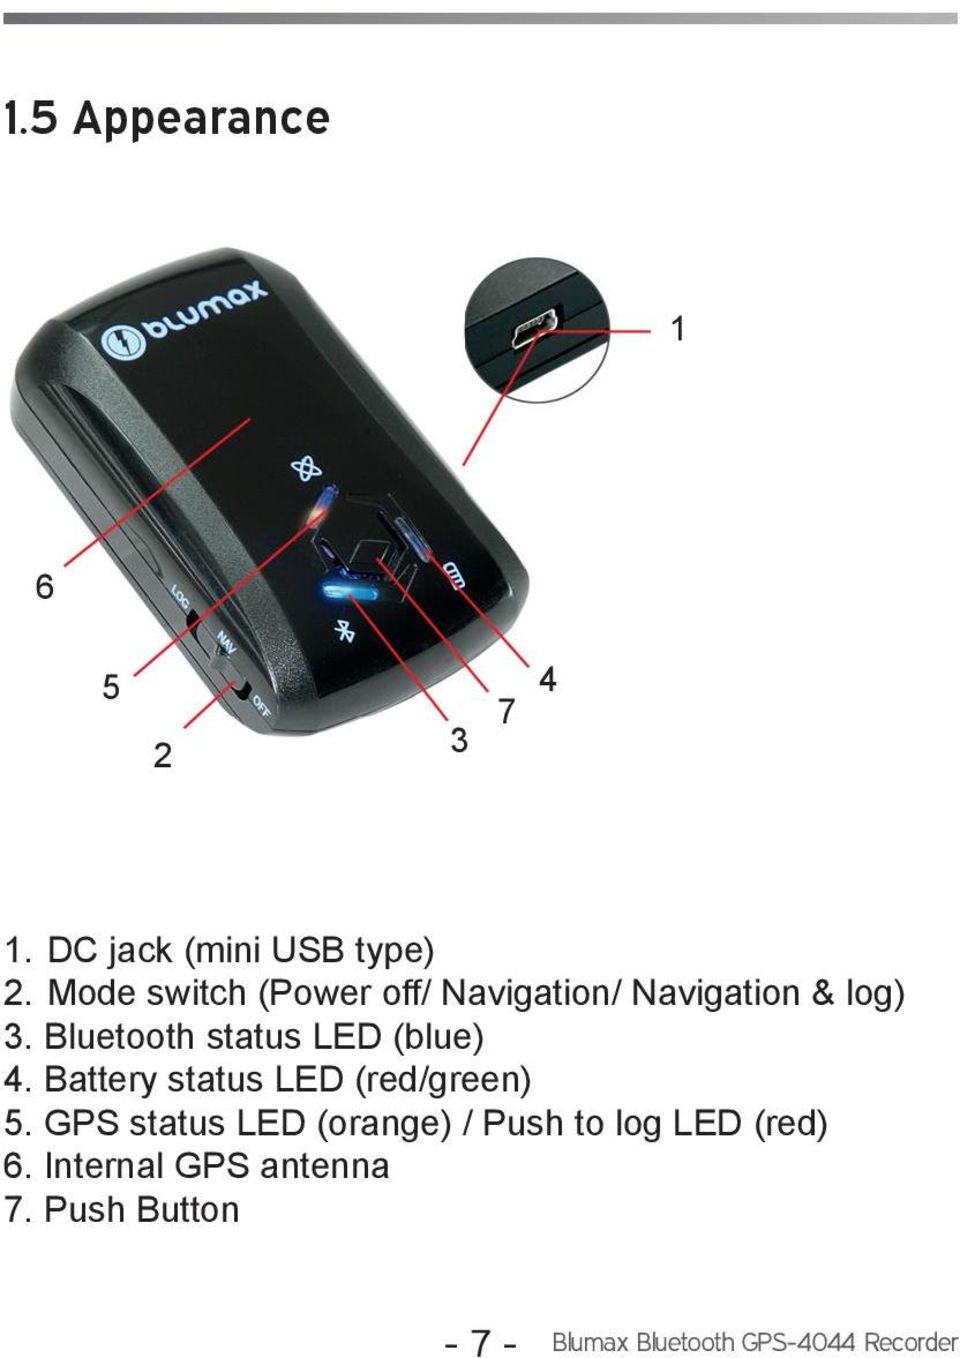 Bluetooth status LED (blue) 4. Battery status LED (red/green) 5.